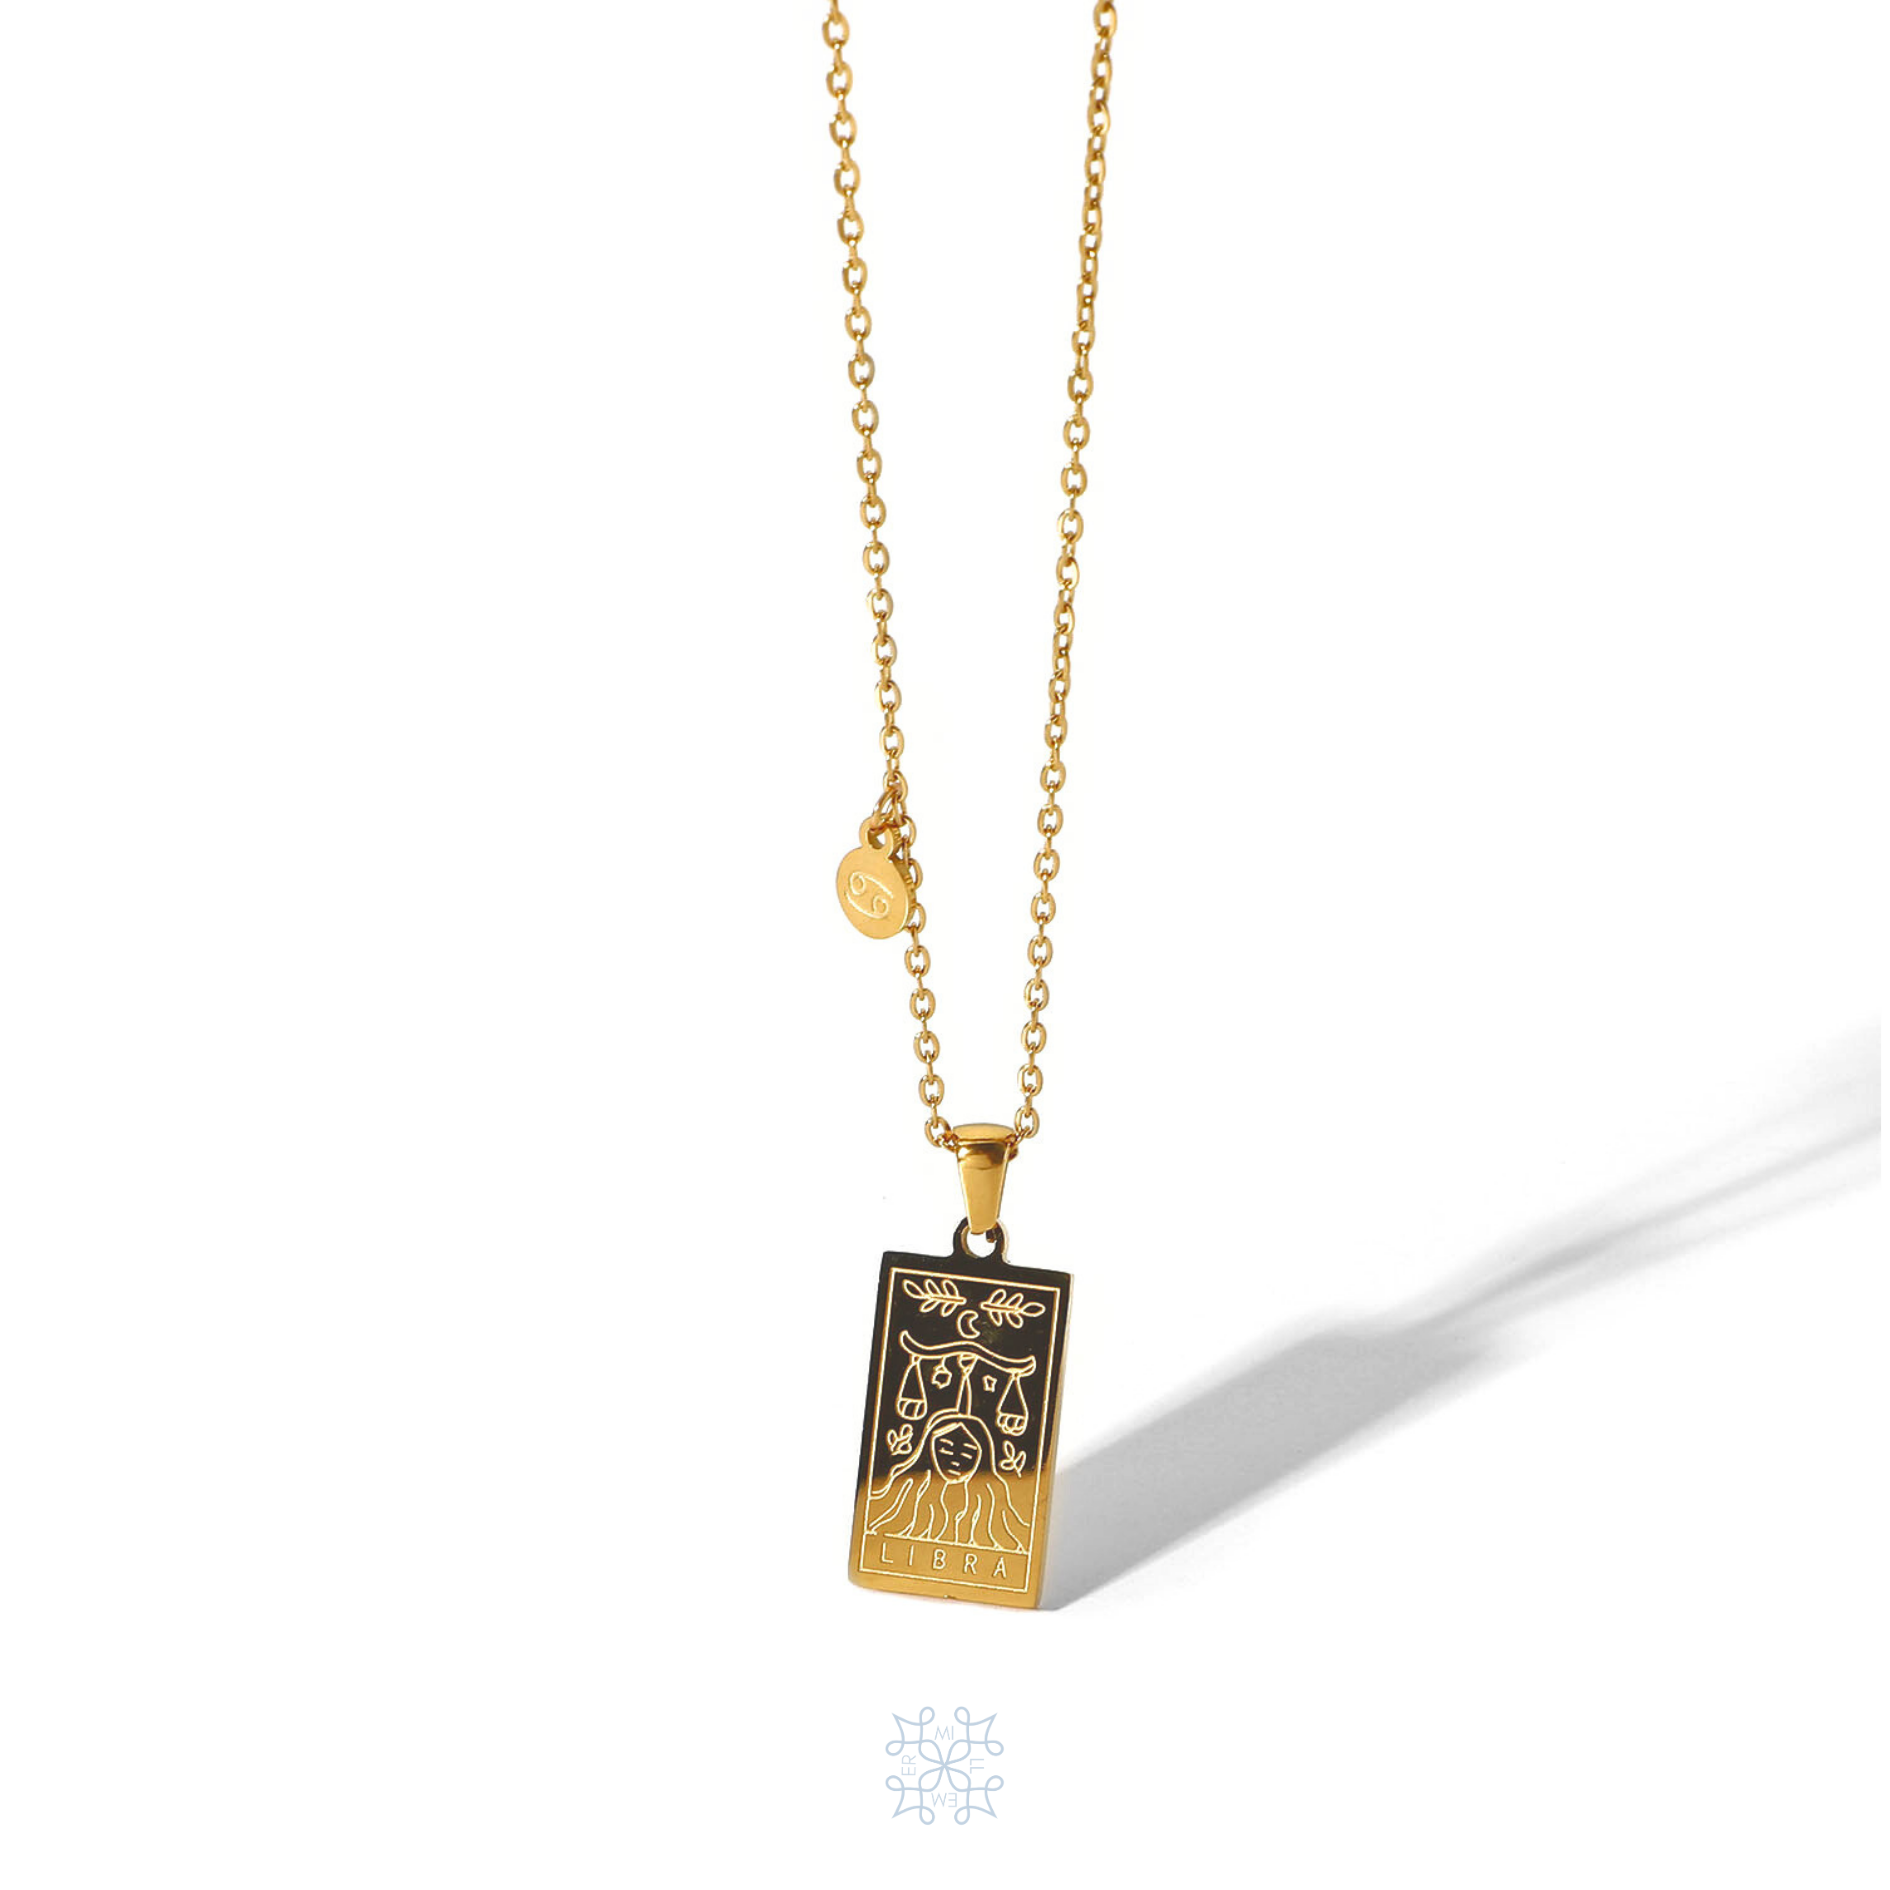 Rectangular gold pendant with Libra engraved and the word Libra in the bottom. Gold pendant with a chain necklace. In the side of the gold pendant is a circle small medalion with the symbol of Libra engraved on it. Libra zodiac pendant gold necklace.